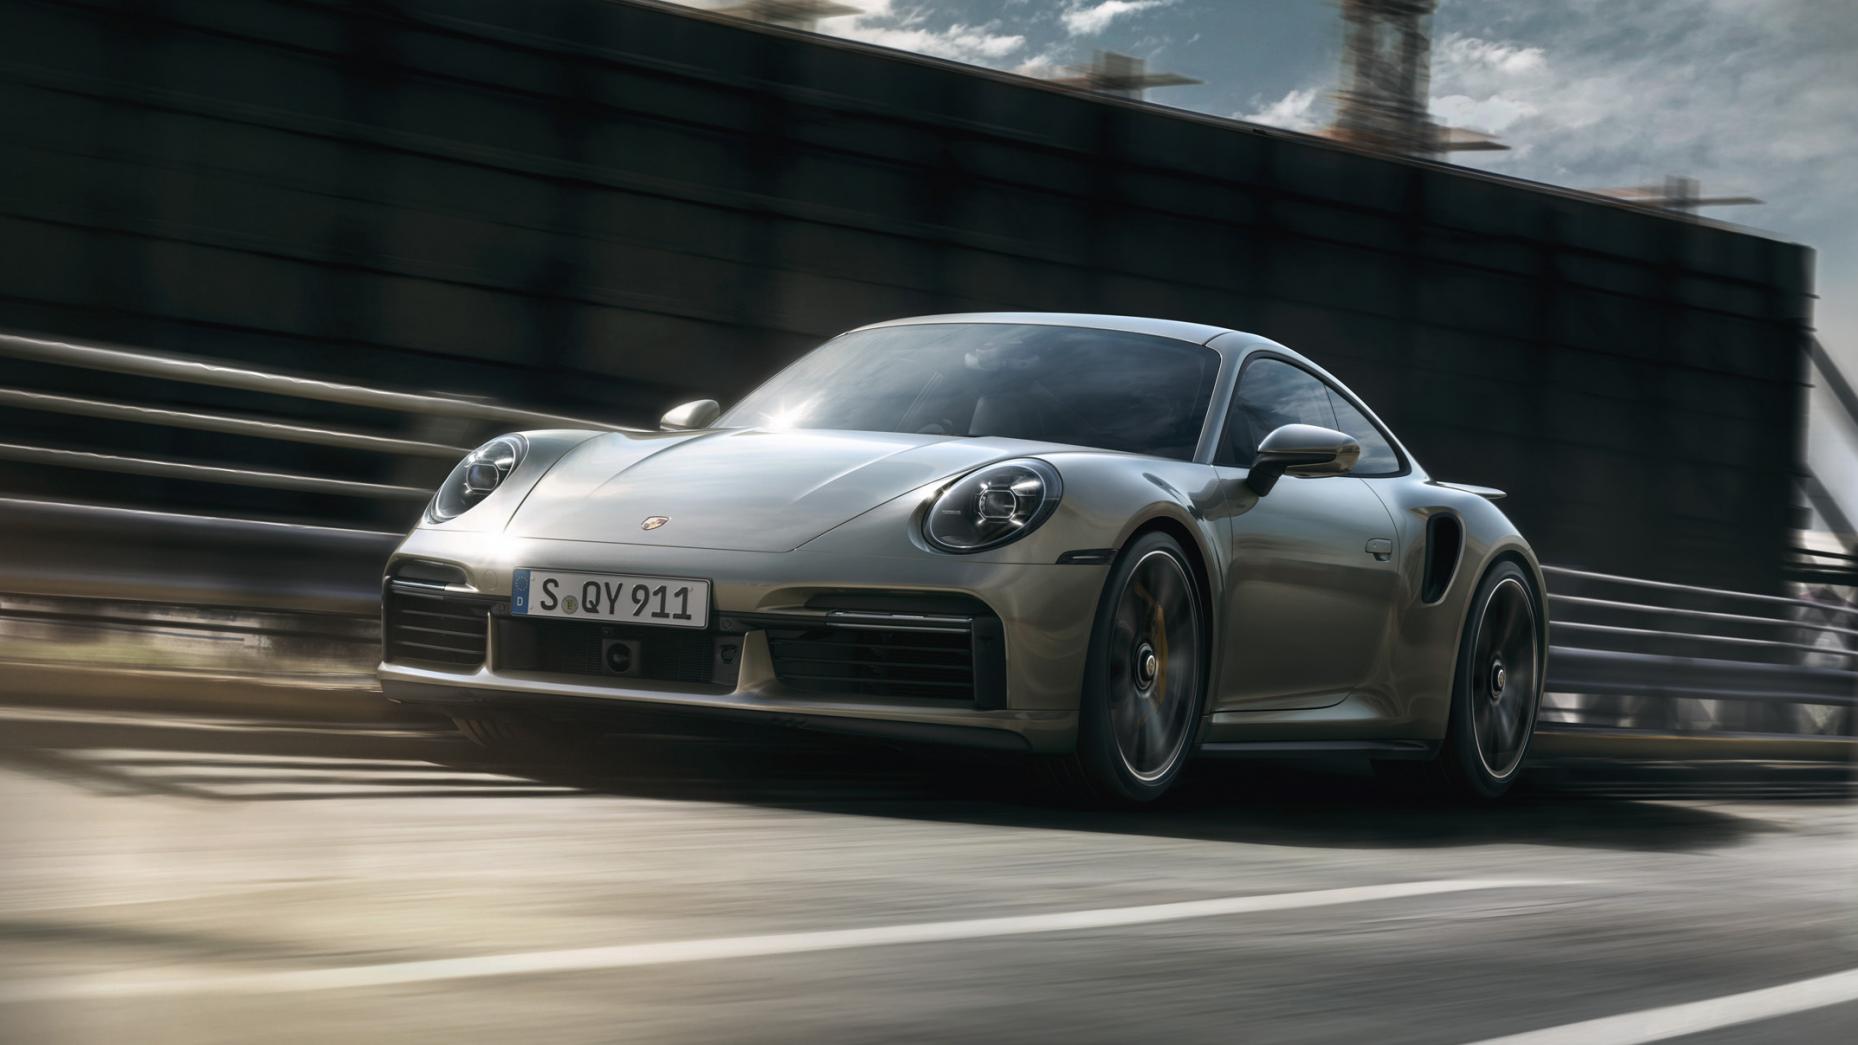 4. There's a reason the Turbo S is here first